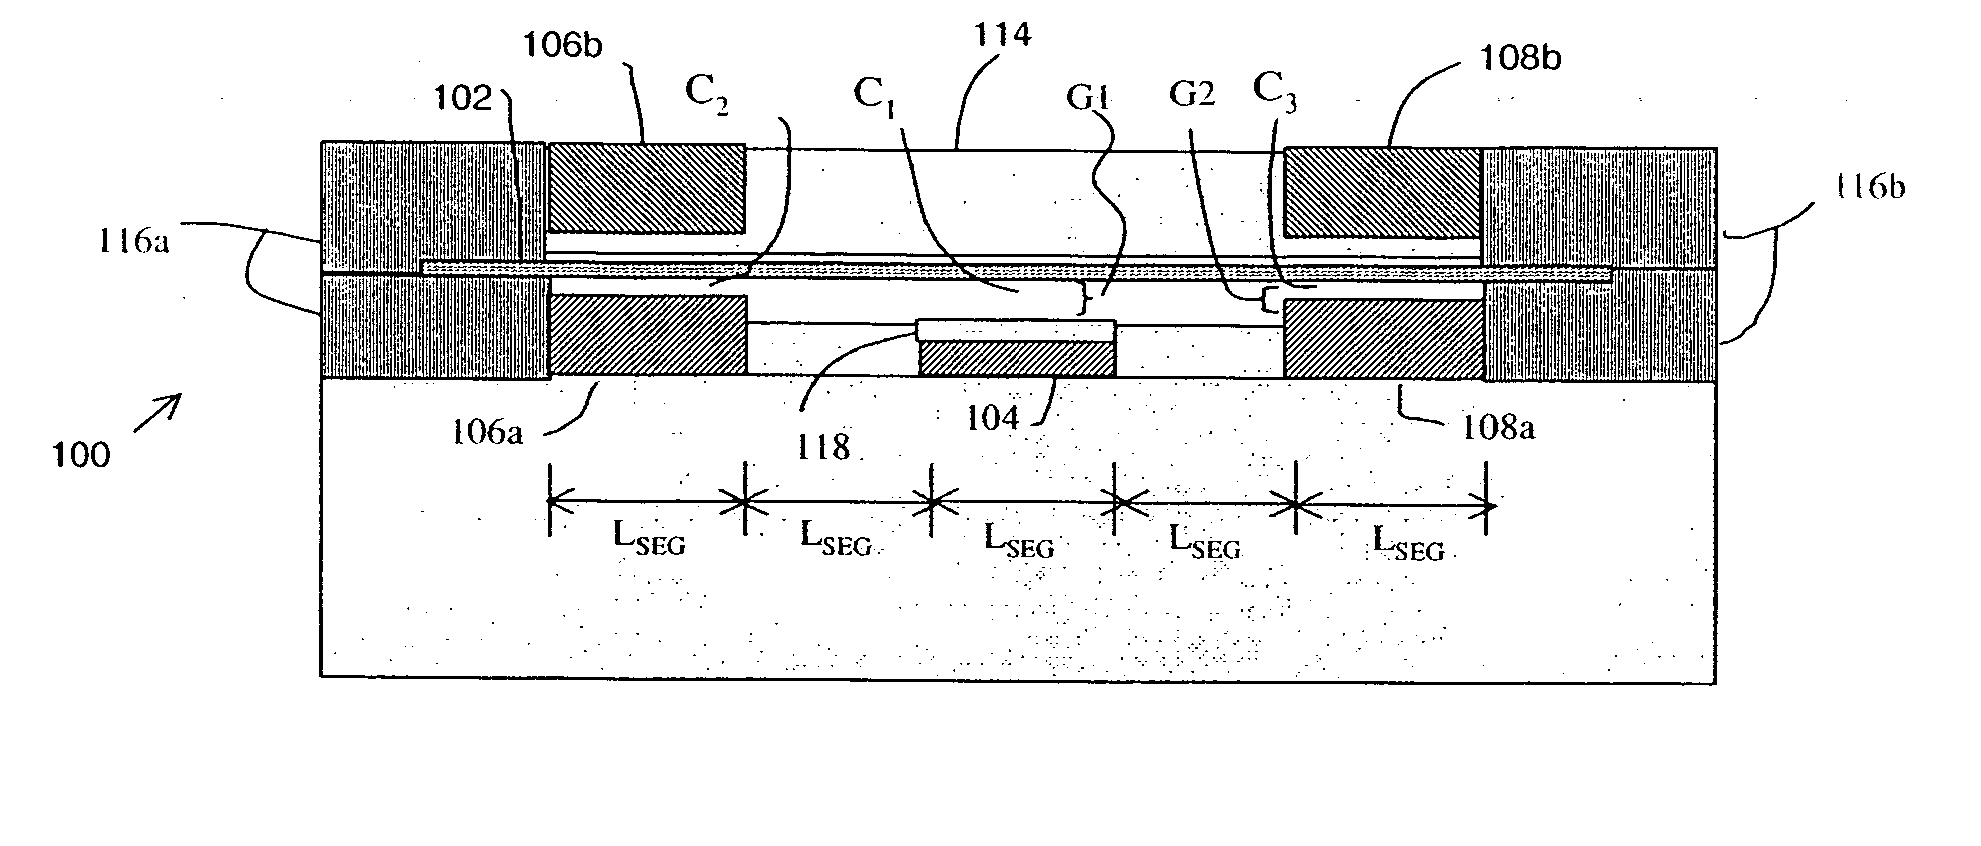 Nanotube-based transfer devices and related circuits